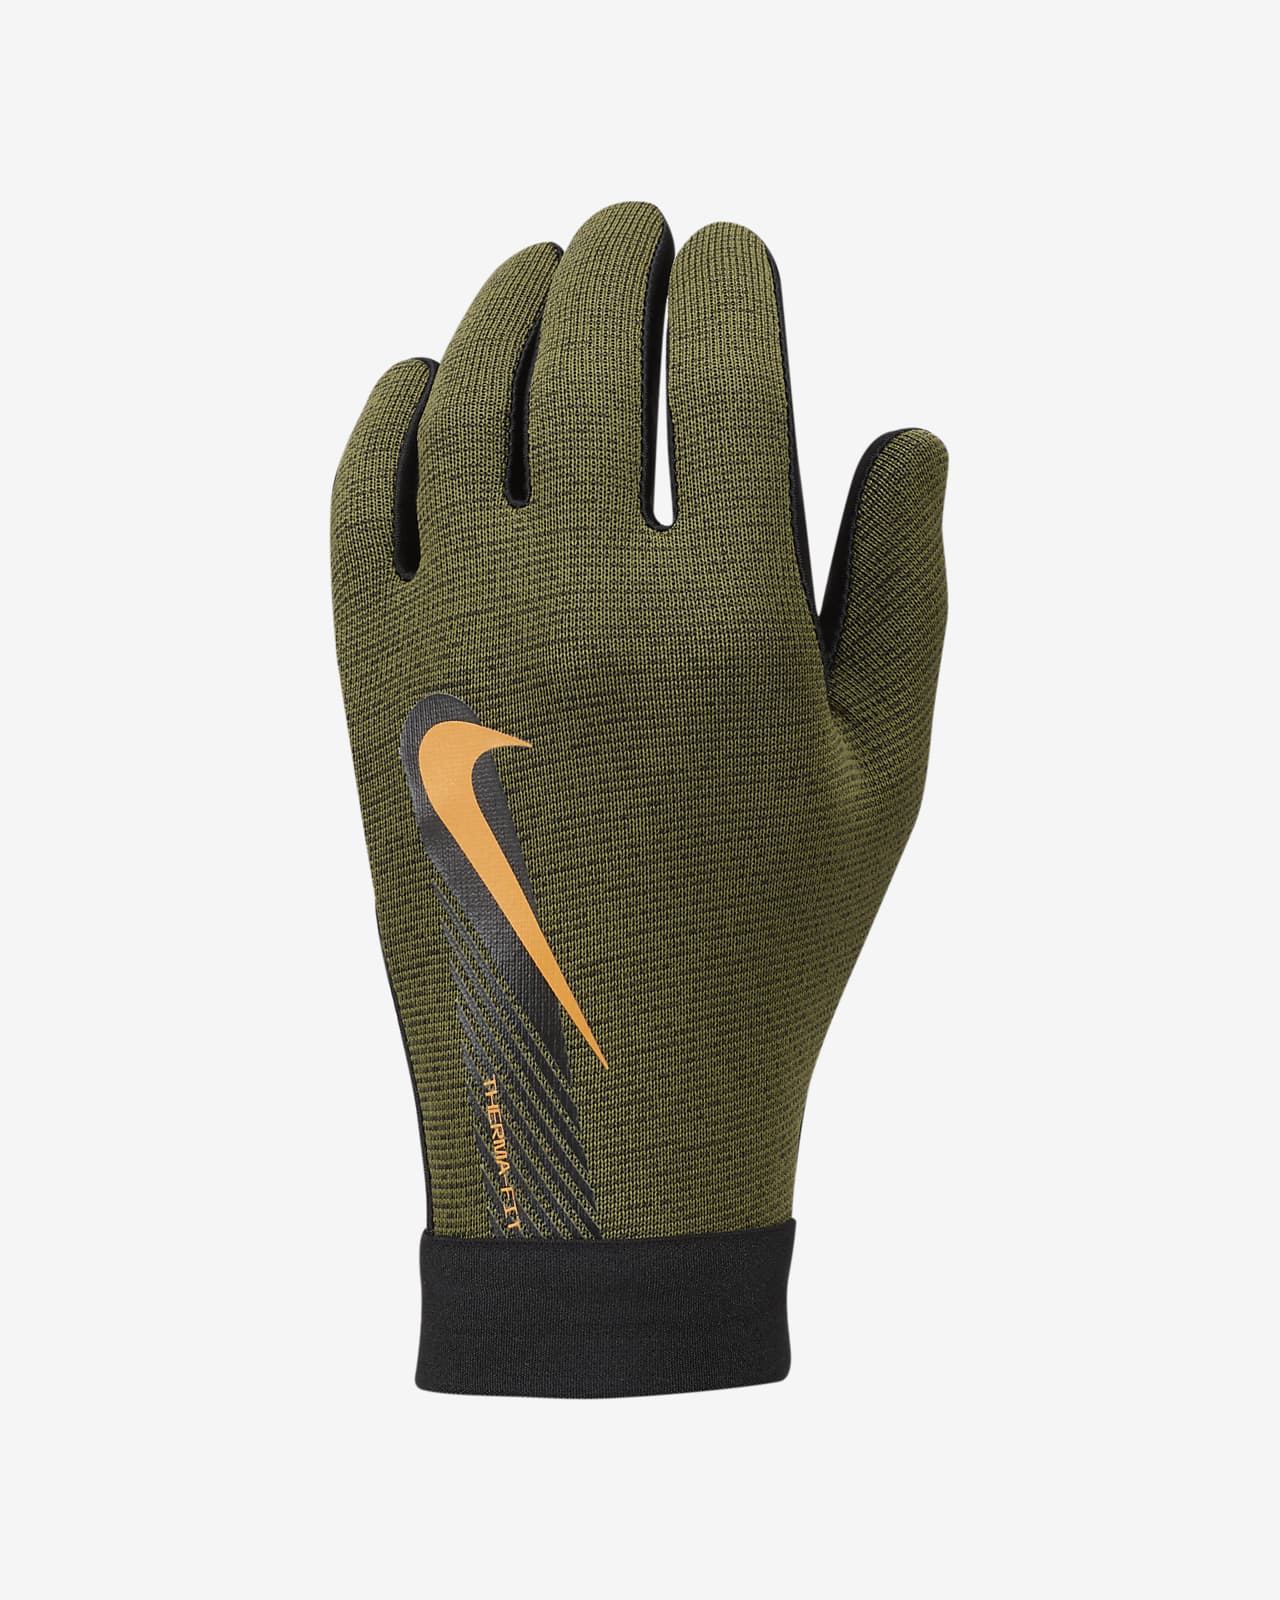 Nike Therma-FIT Academy Football Gloves